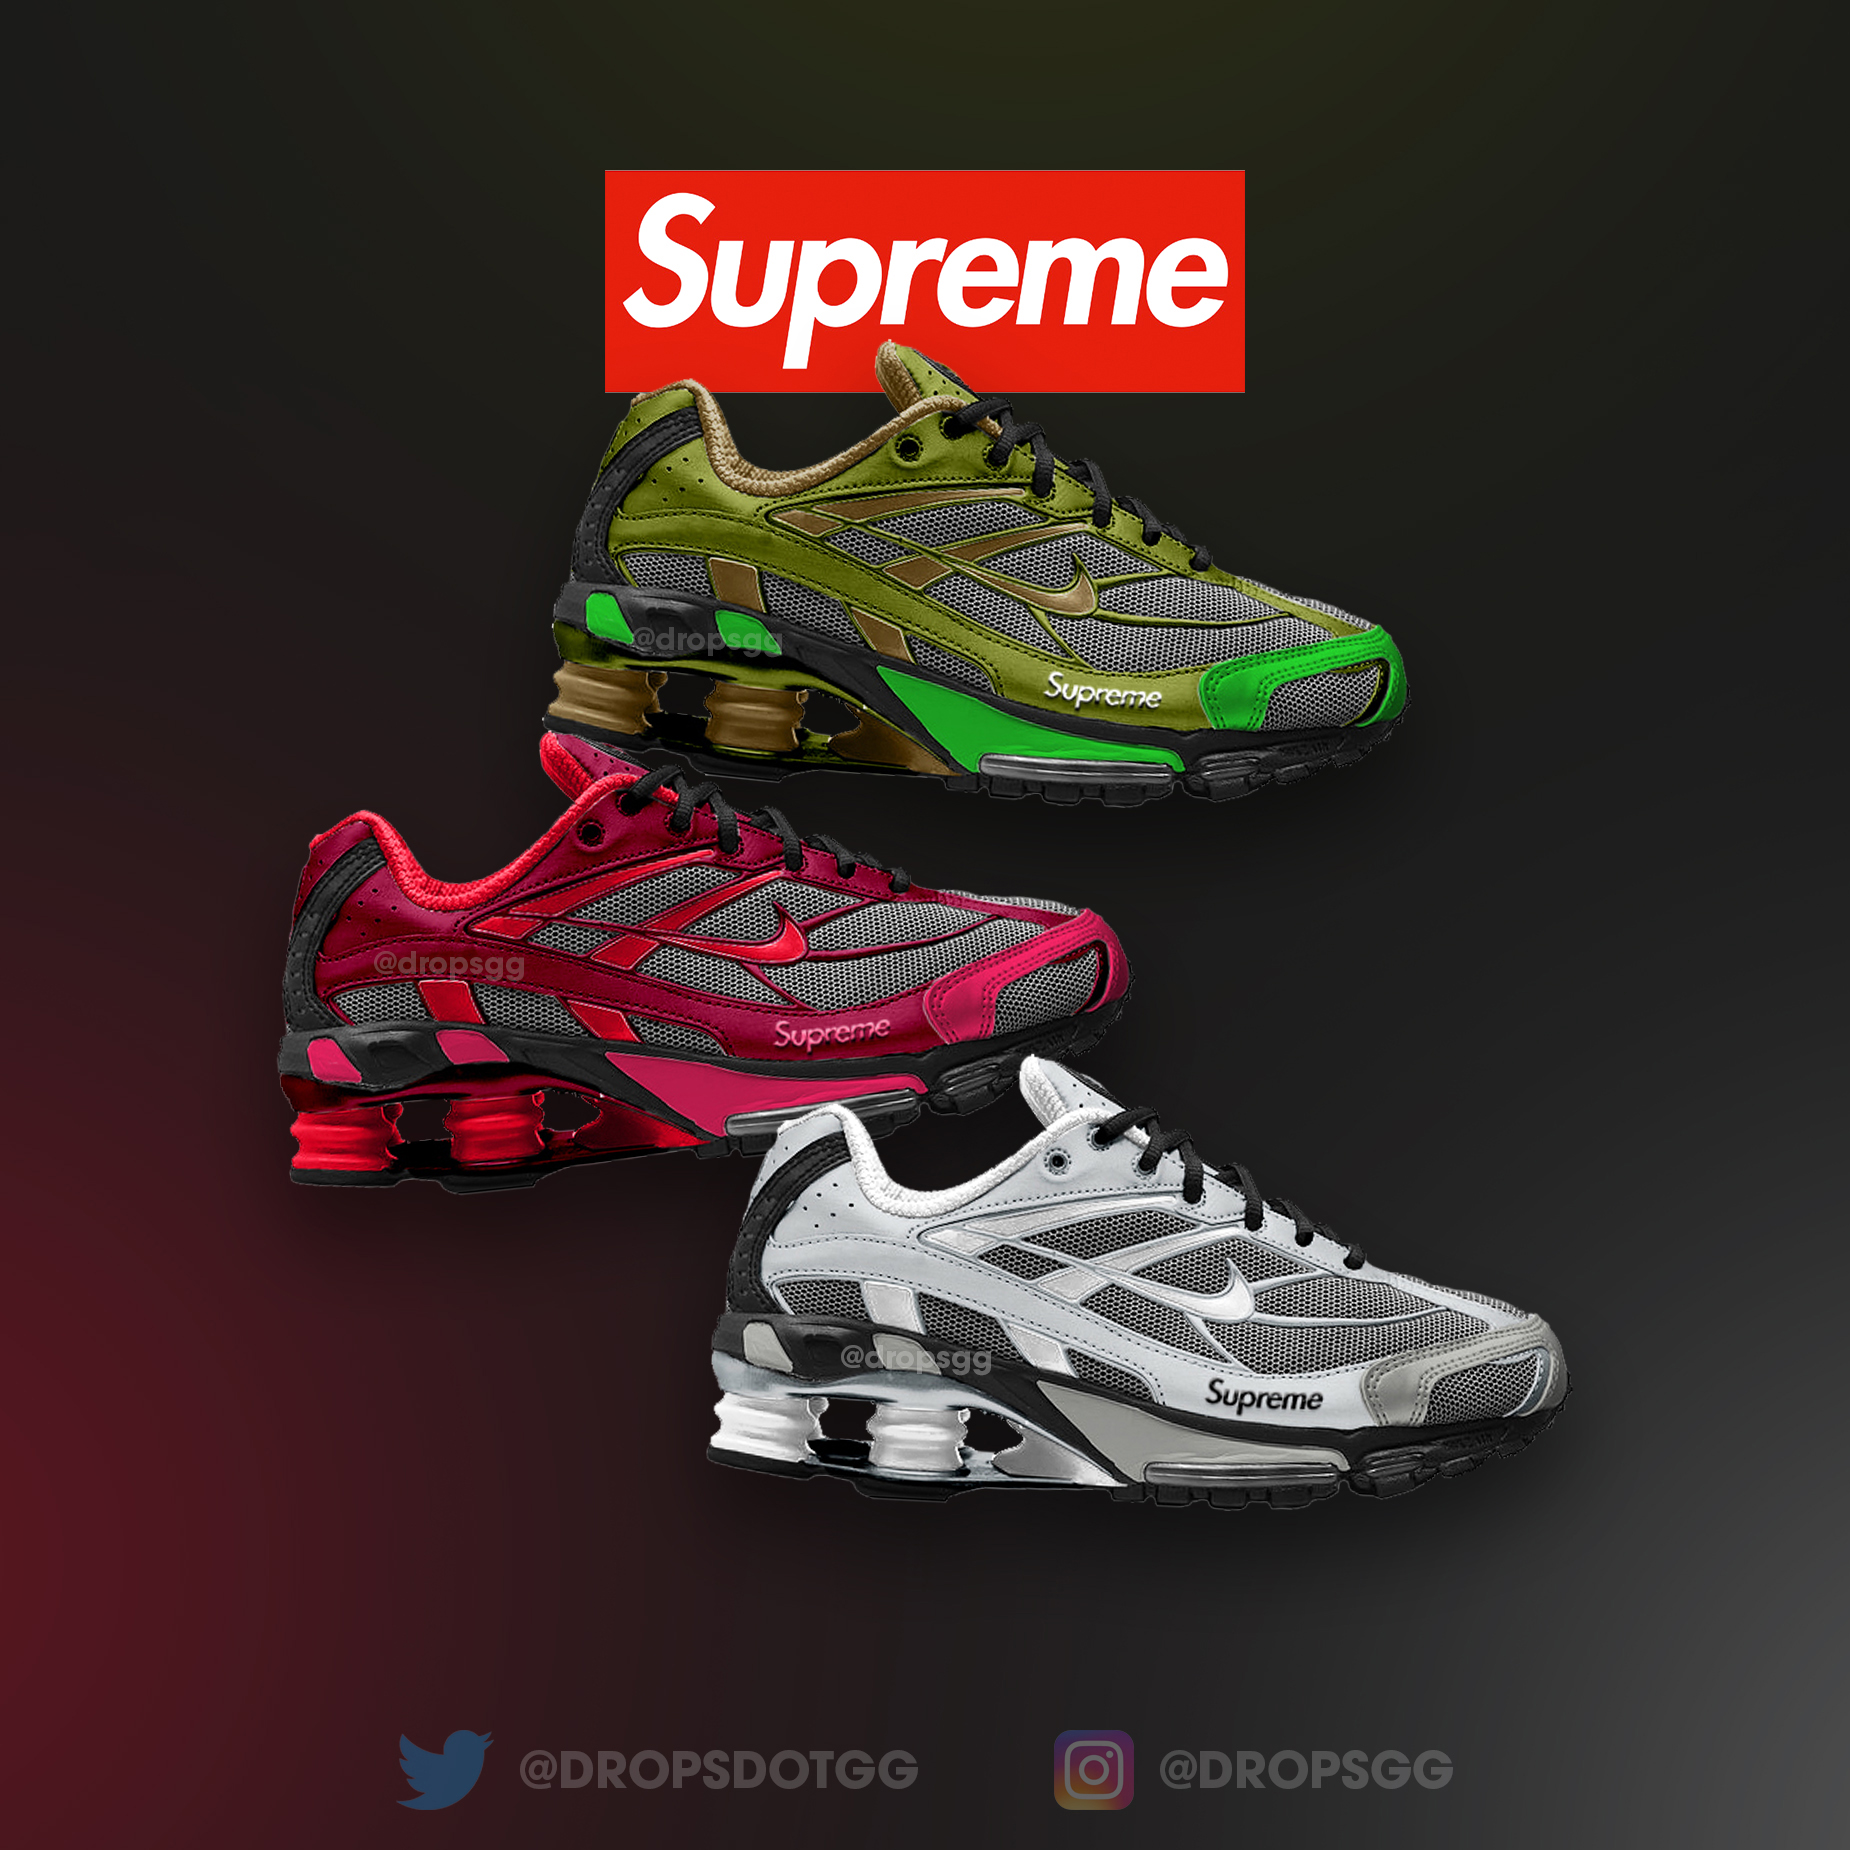 X 上的Supreme Drops：「Supreme x Nike is expected to release a